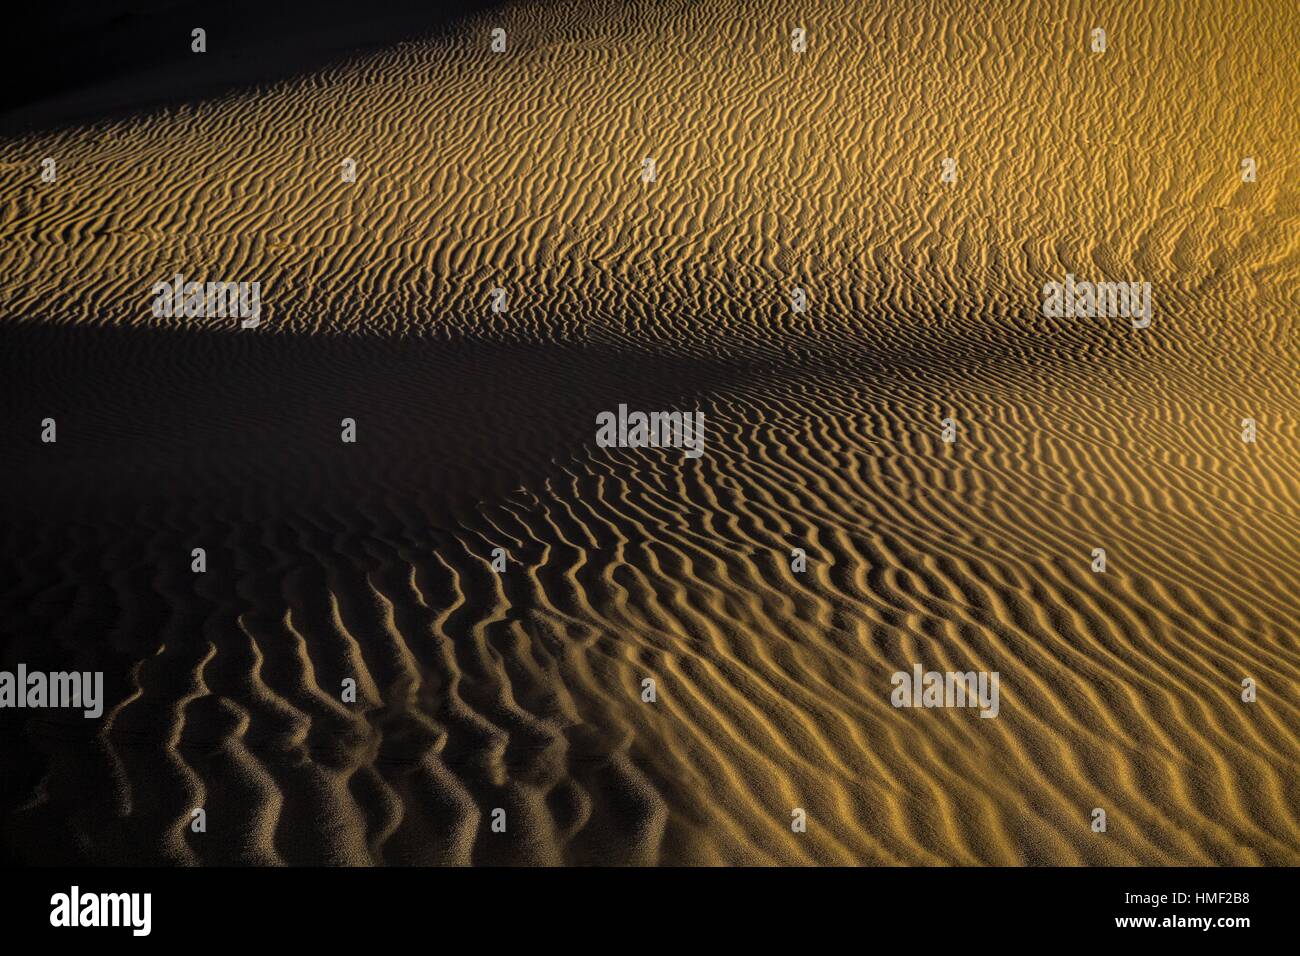 Patterns and ripples produced by erosion are the dominant features of Eureka Dunes at Death Valley National Park, California. Stock Photo